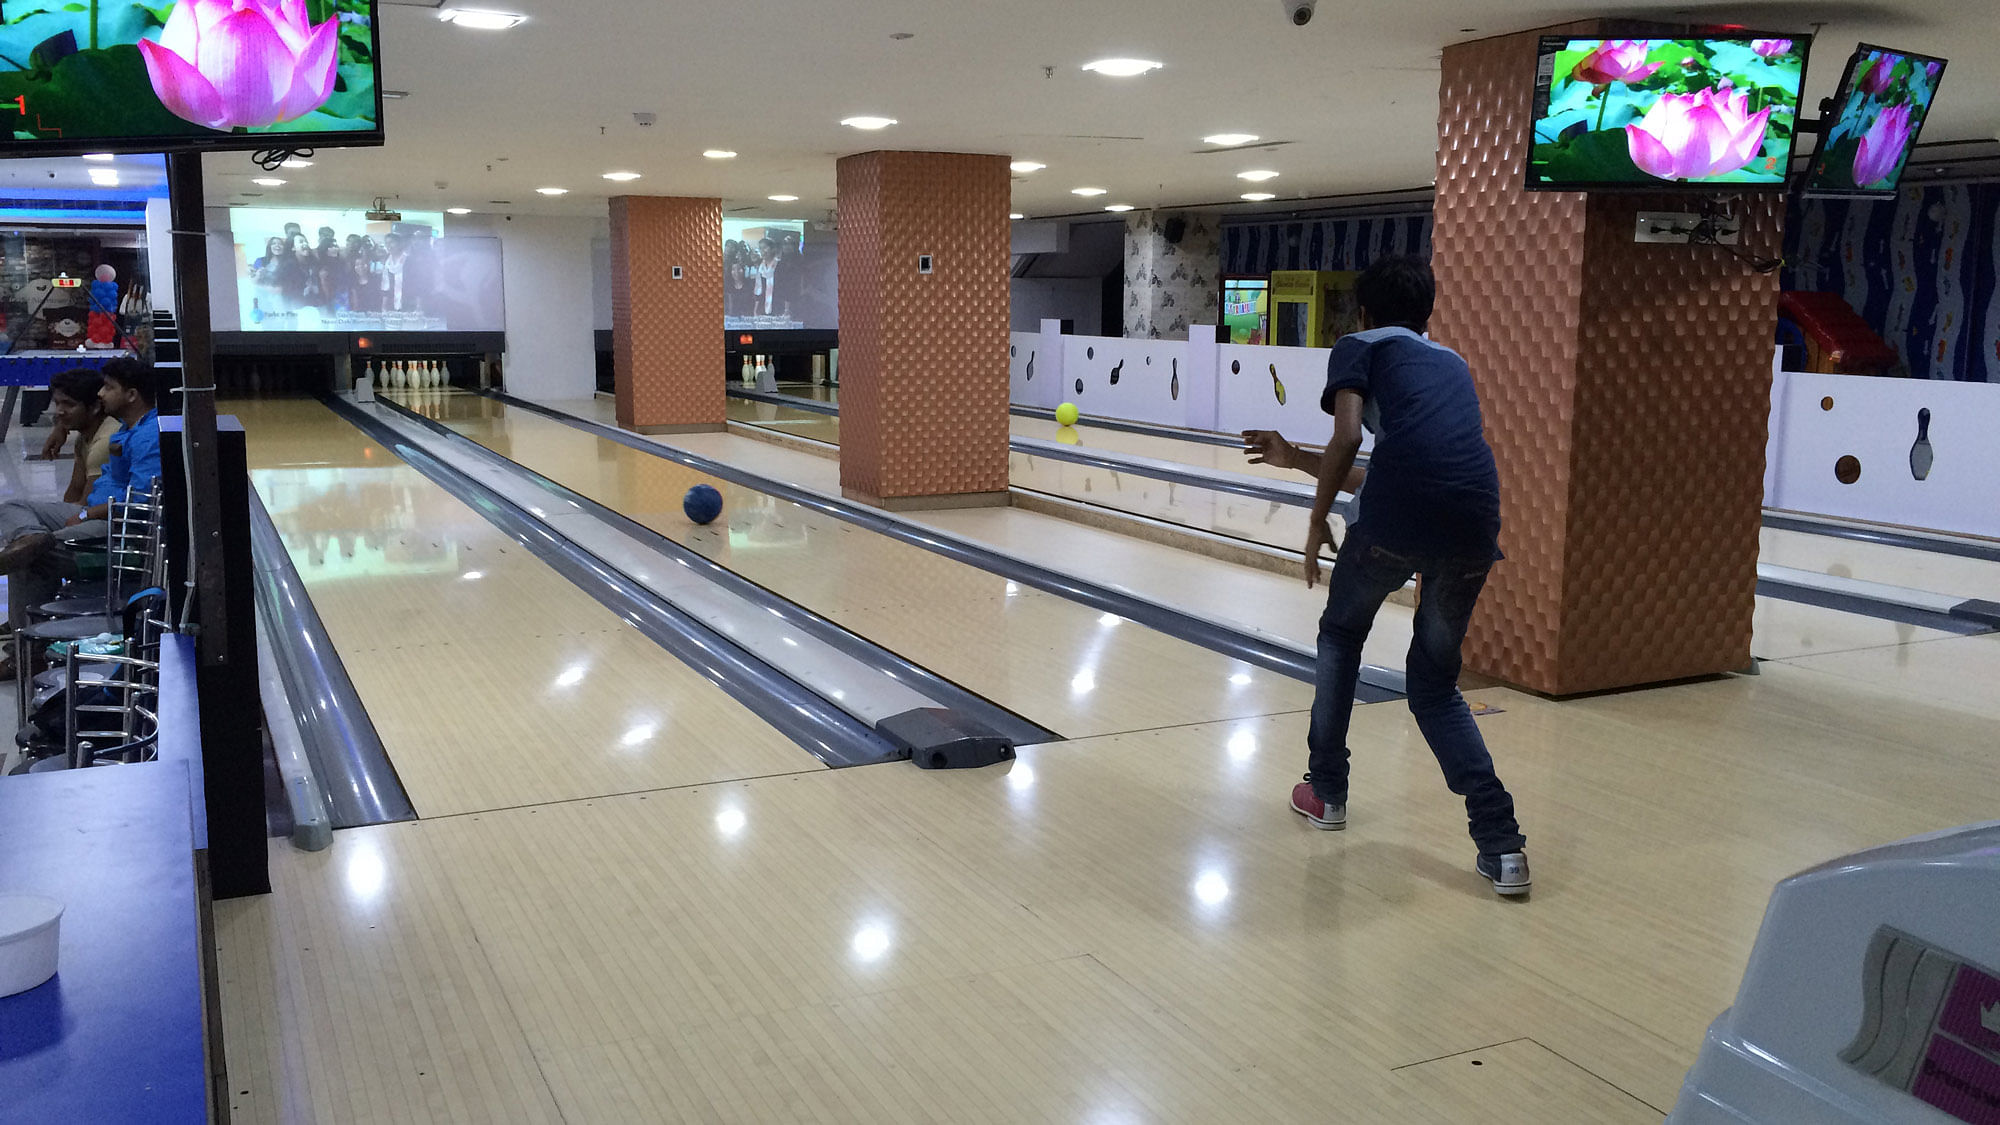 Kislay Khan and Chayan Kunder run Forks n Pins, a bowling alley where young people can hang out and be safe. (Photo: <b>The Quint</b>)